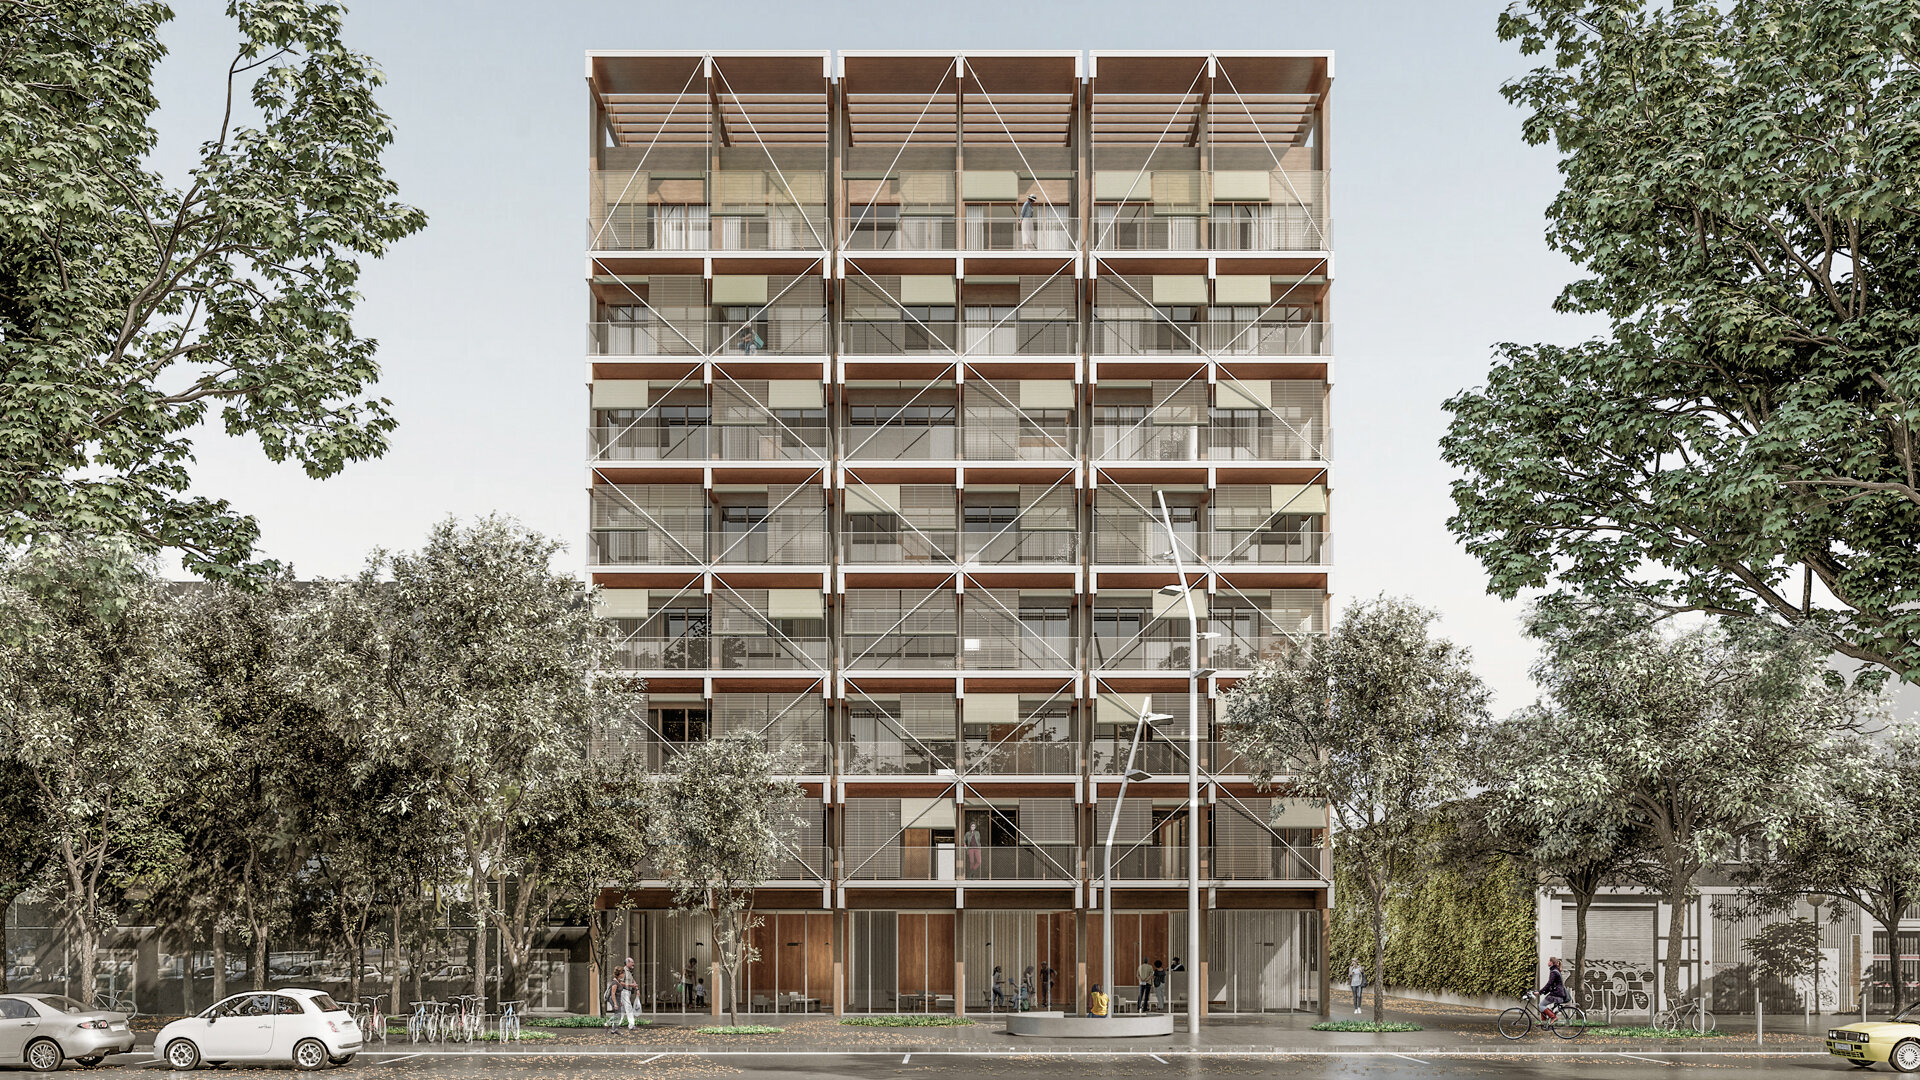 Sant Marti Social Housing. Industrialized timber building